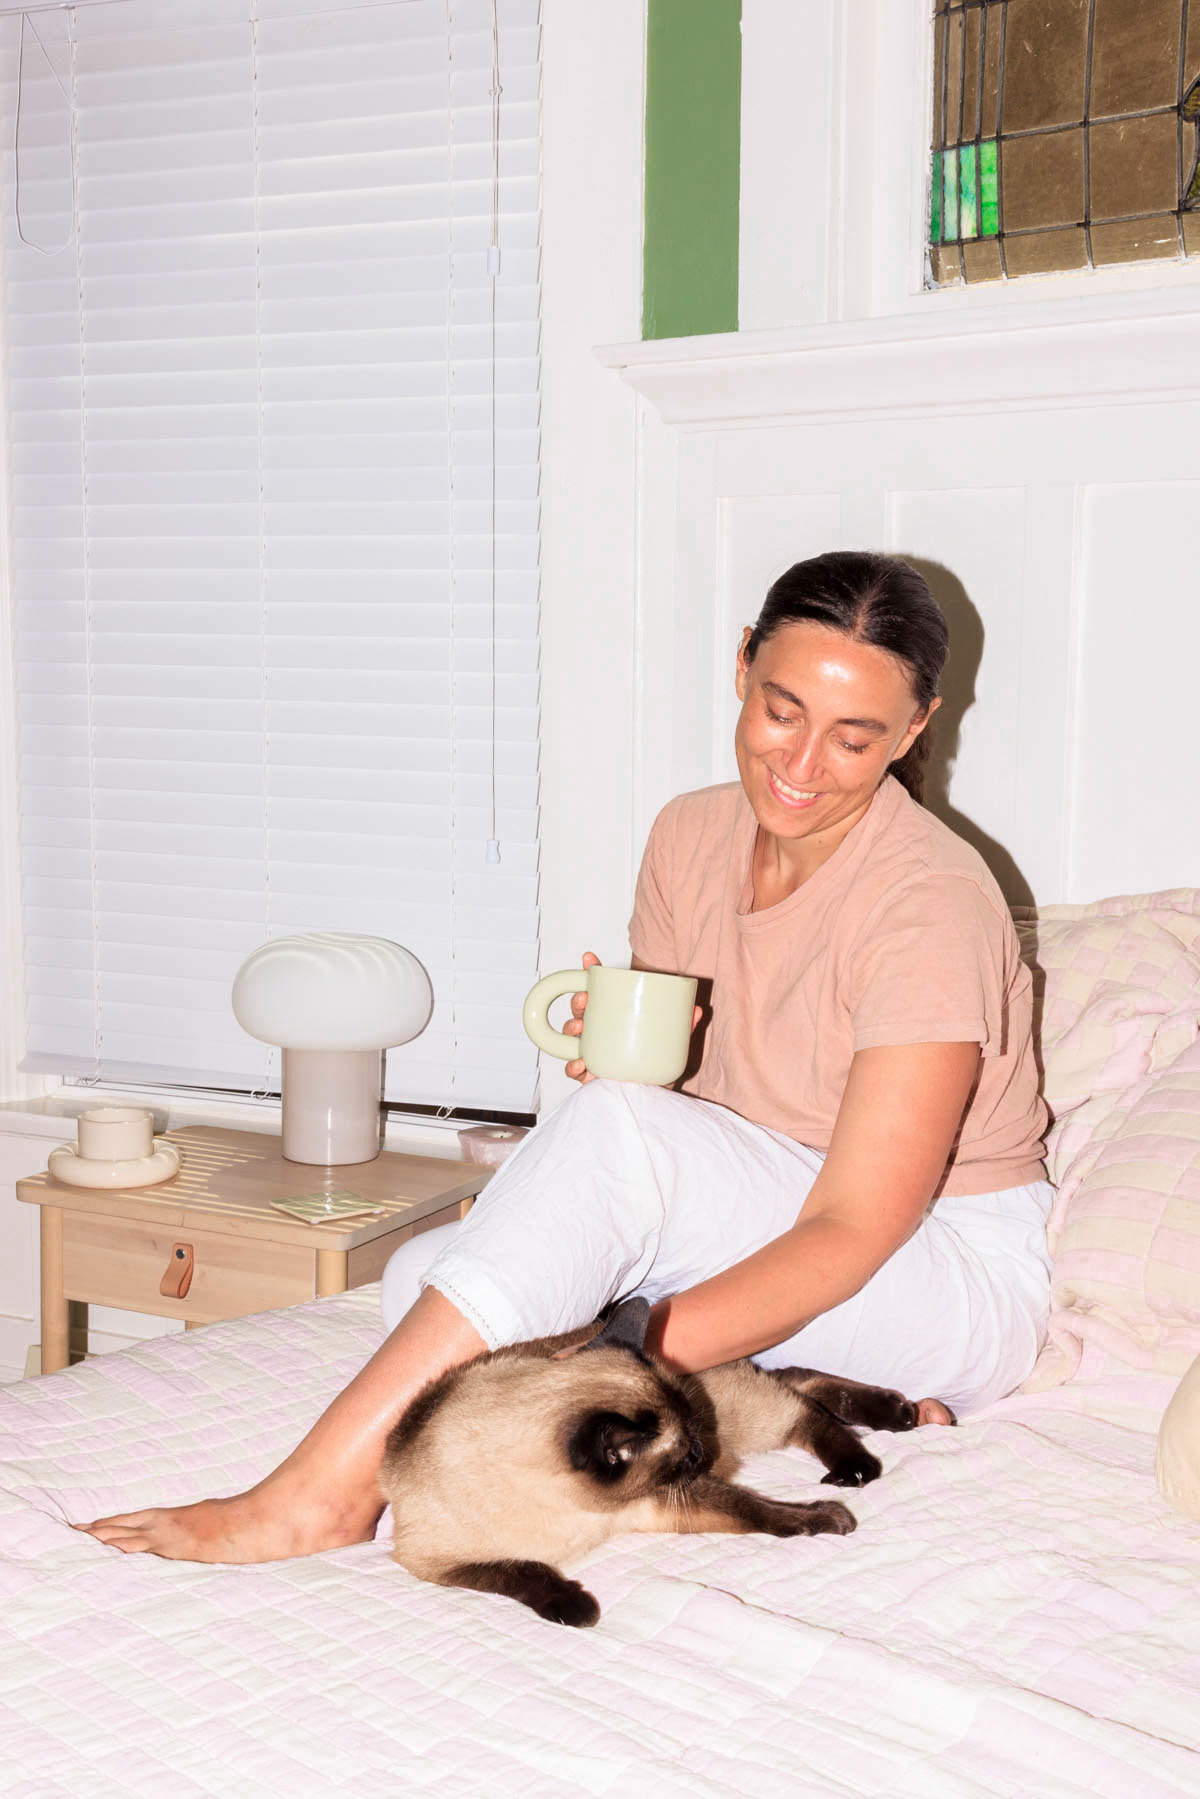 A woman sitting on a bed with a small cat.